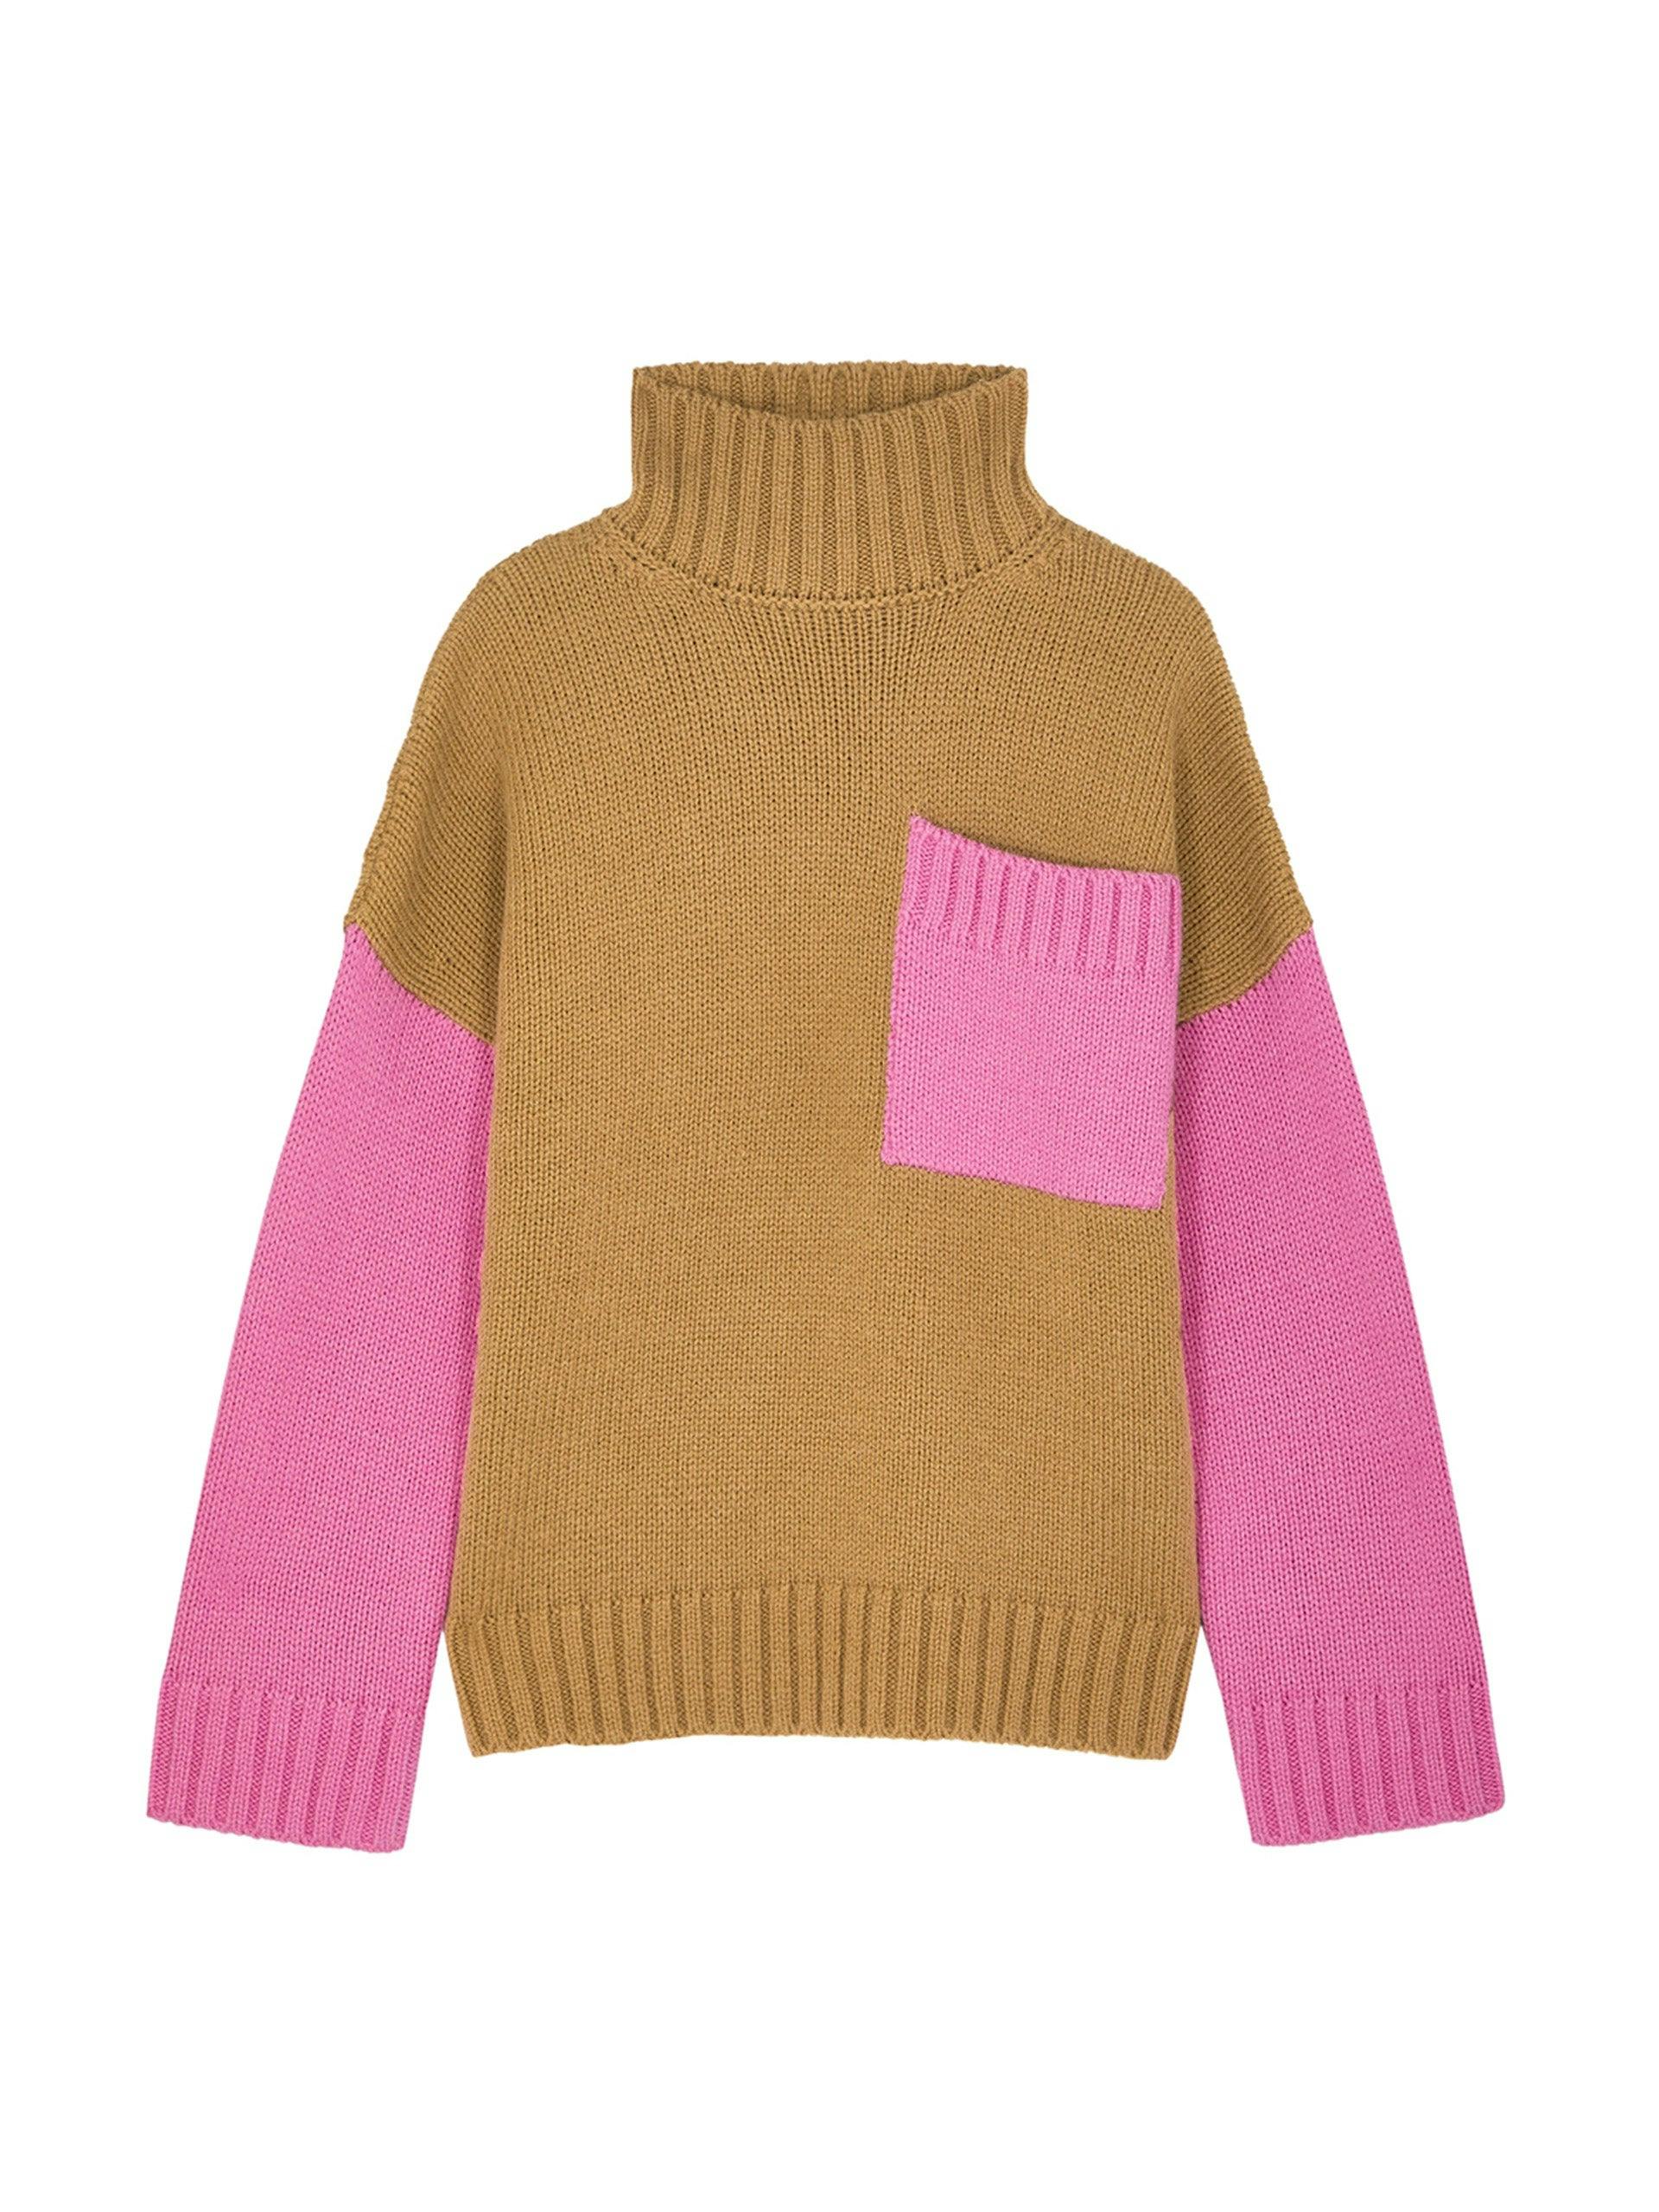 Brown and pink colour-block jumper